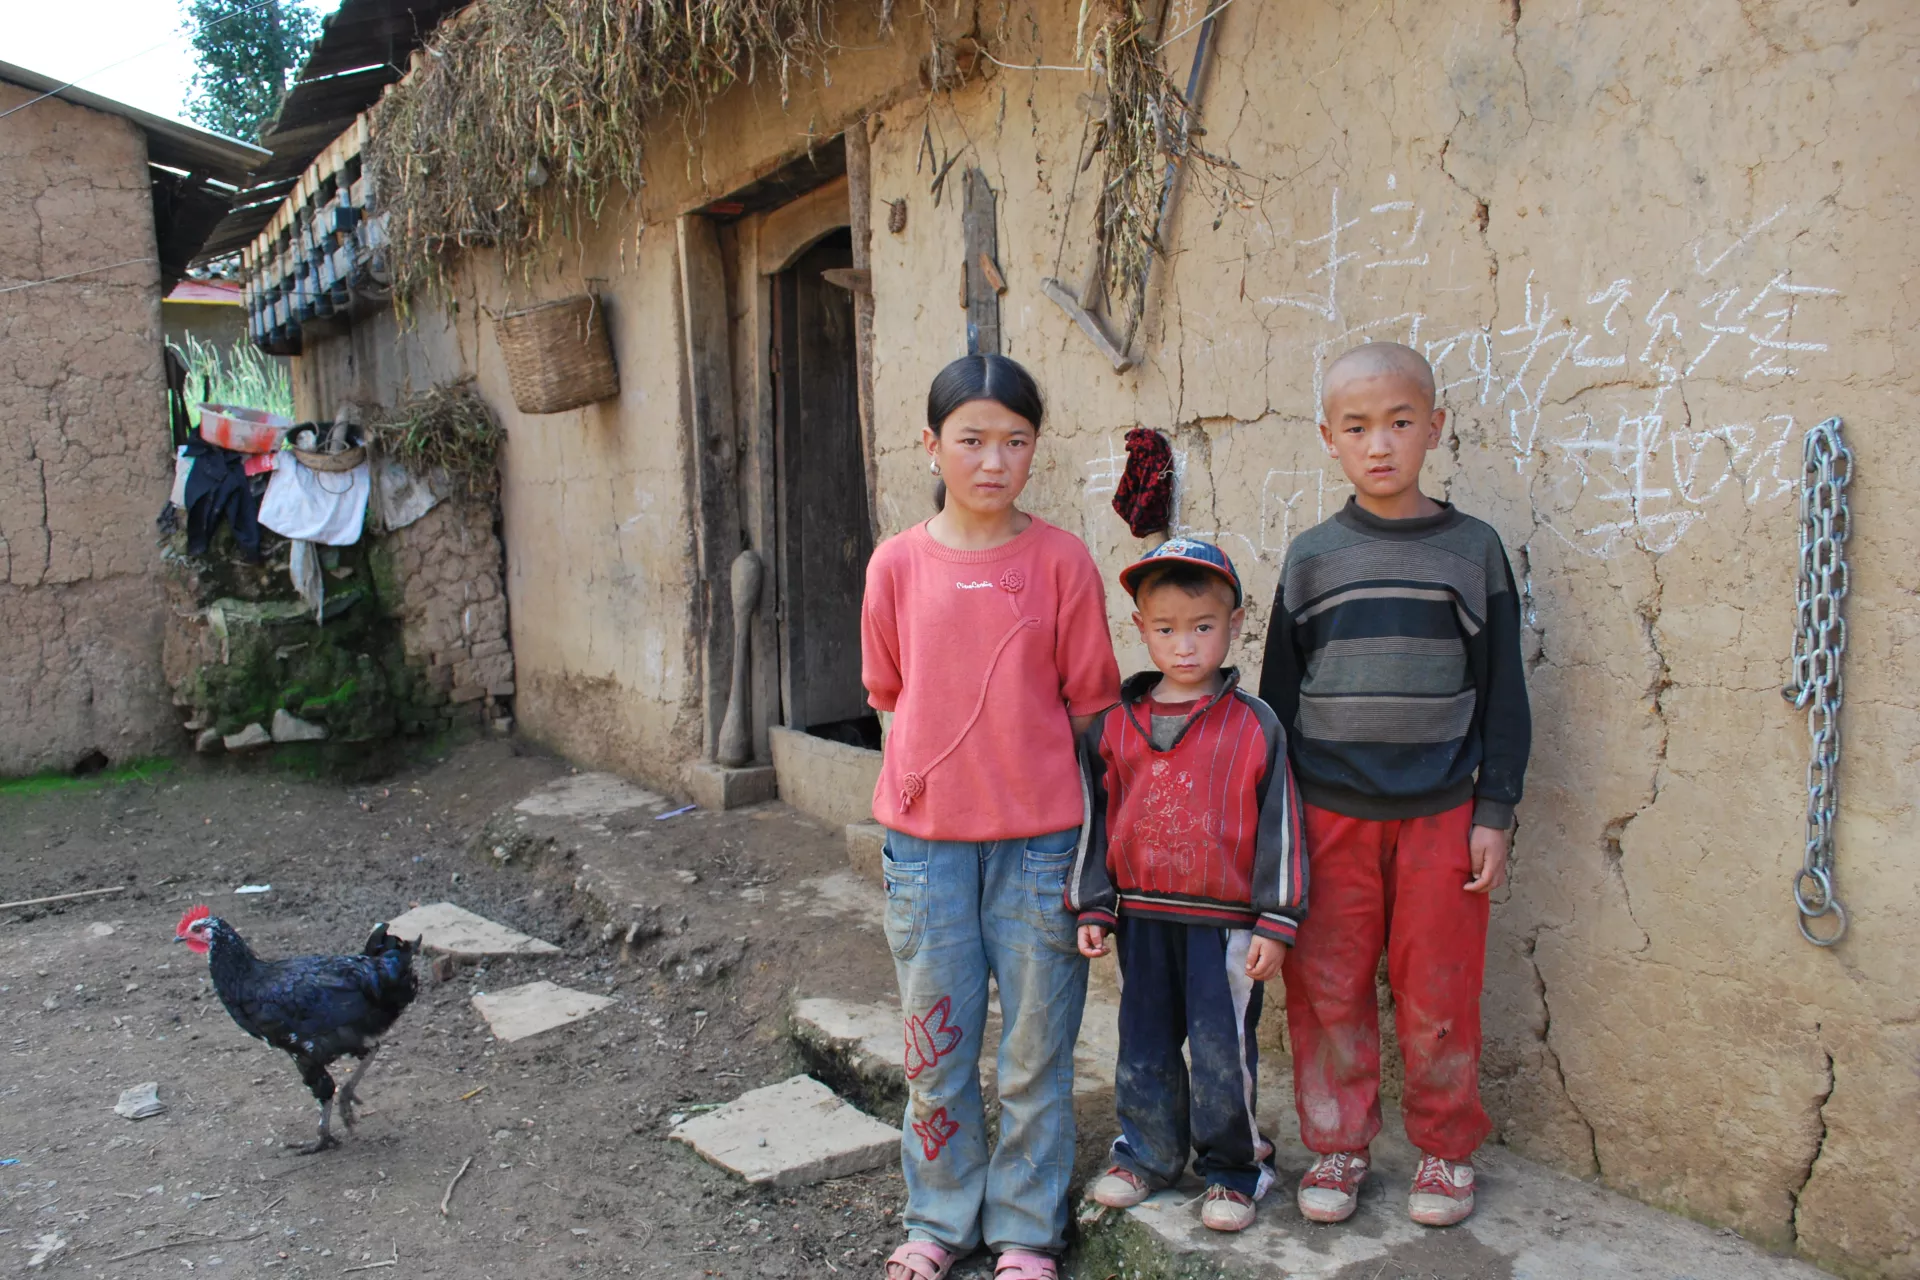 13-year-old Jiwu (1st Left) and her younger brothers stand in front of their house in this photo taken in early September, 2010.